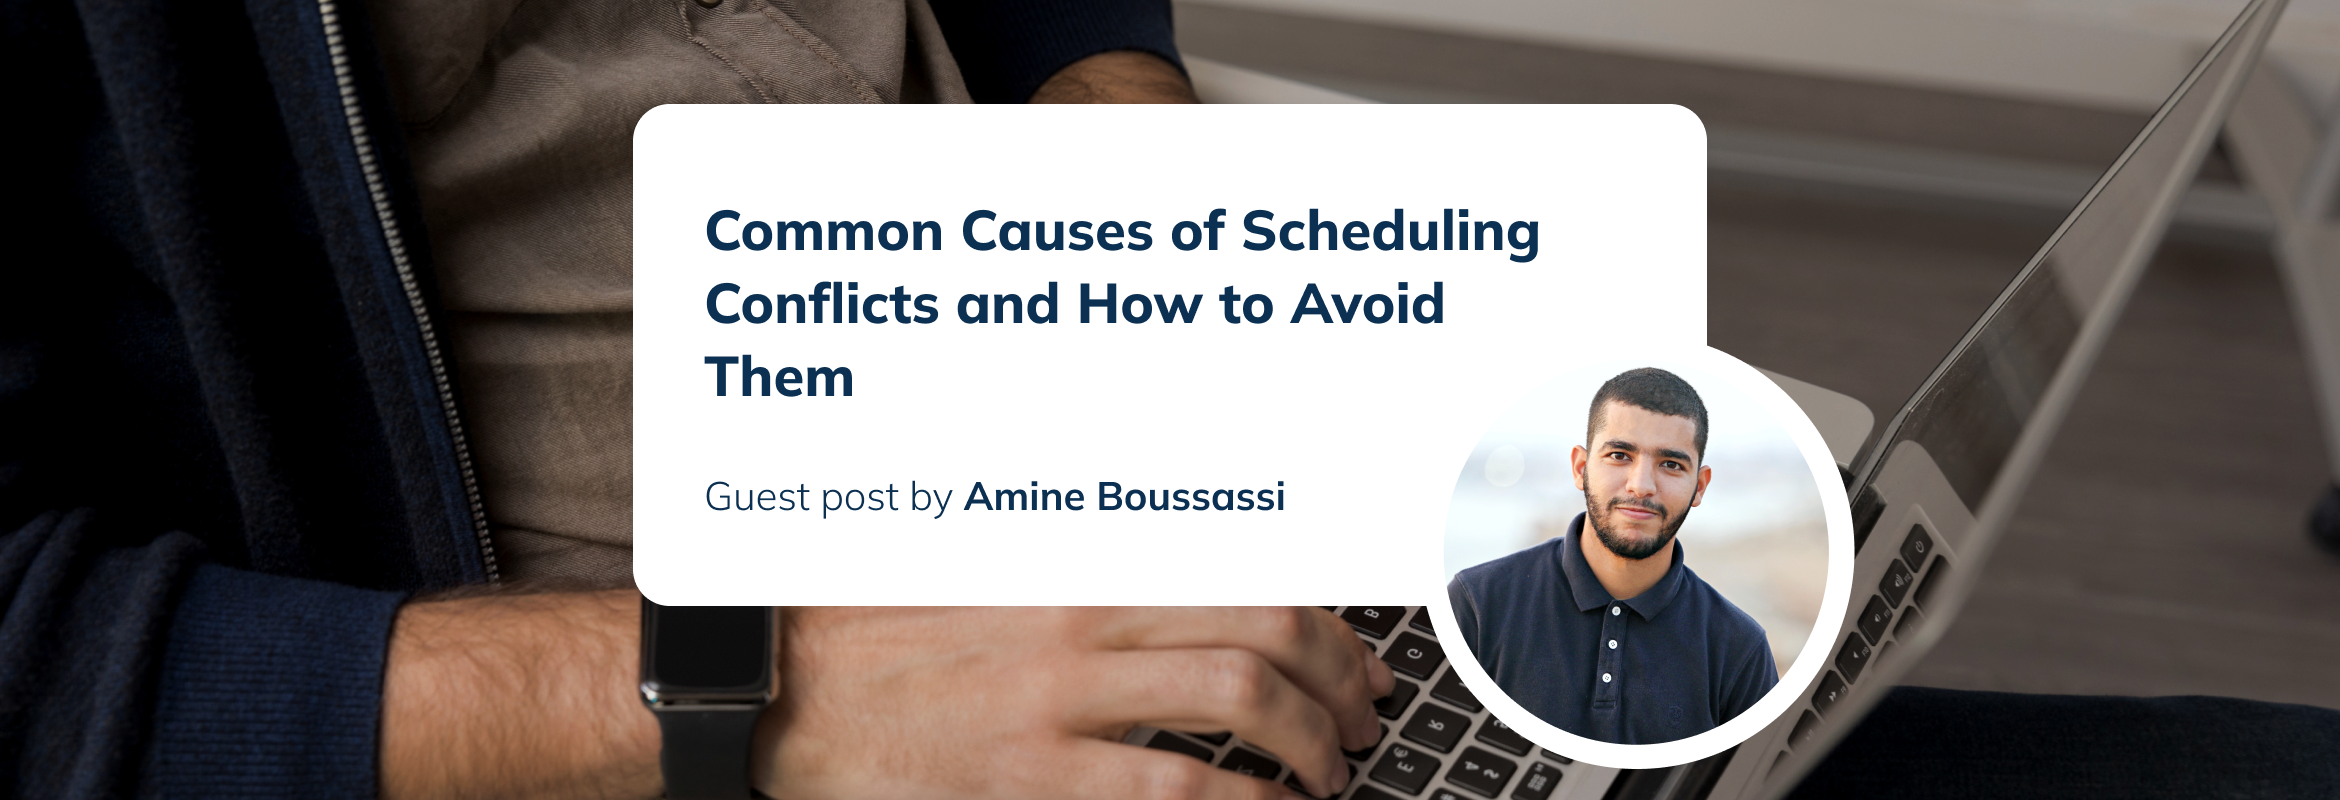 Common Causes of Scheduling Conflicts and How to Avoid Them